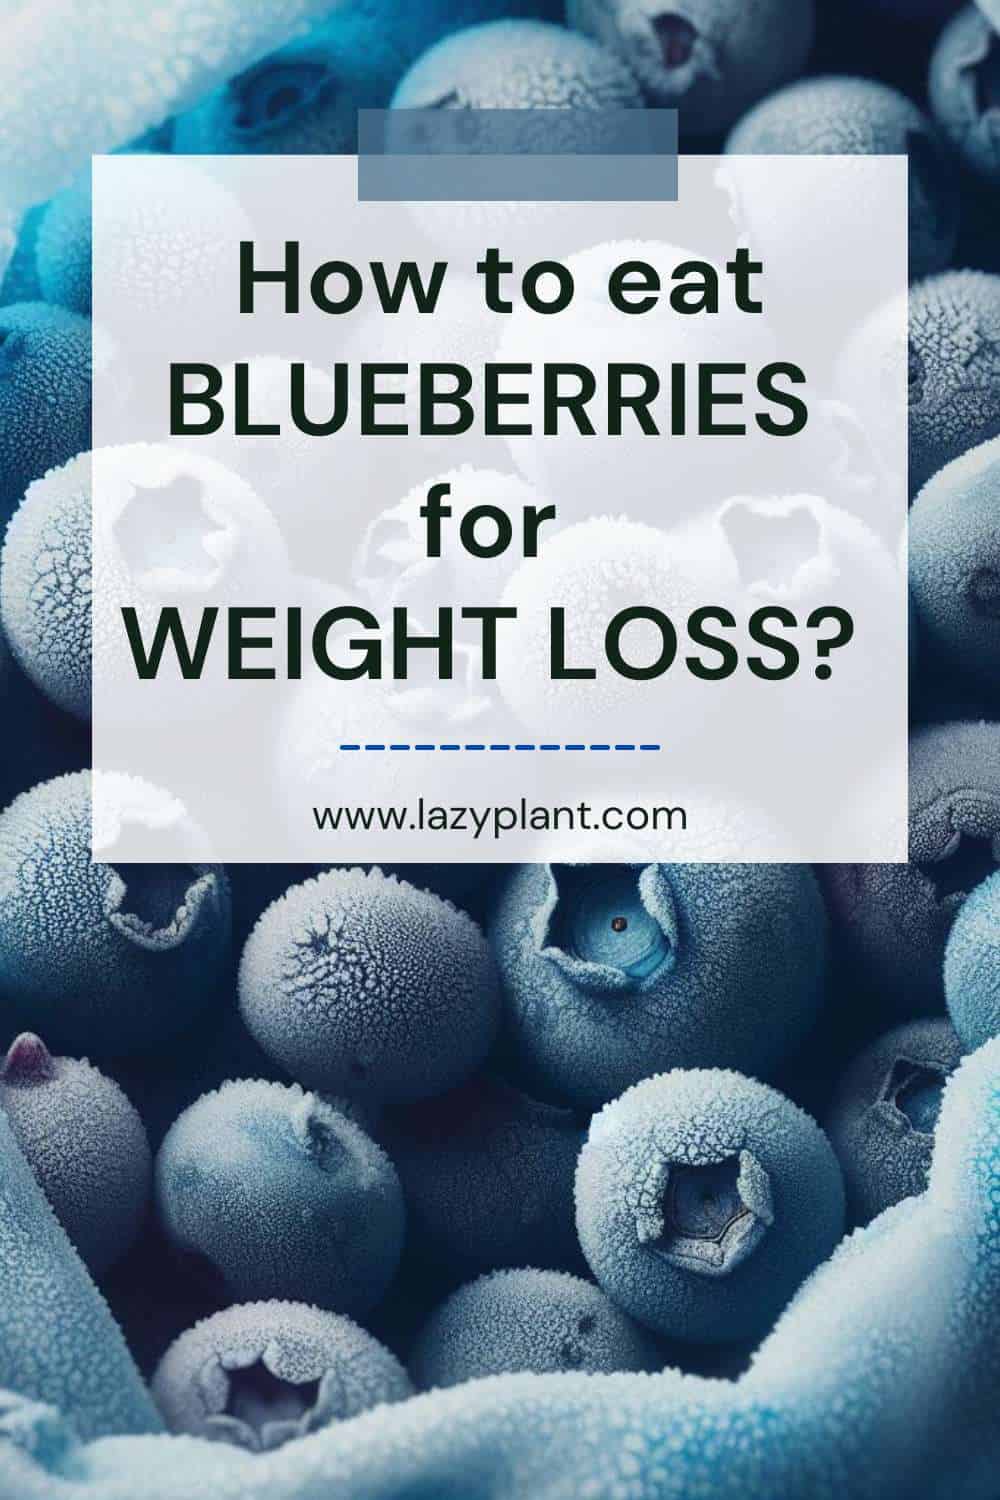 How to eat Blueberries as a healthy snack for Weight Loss?